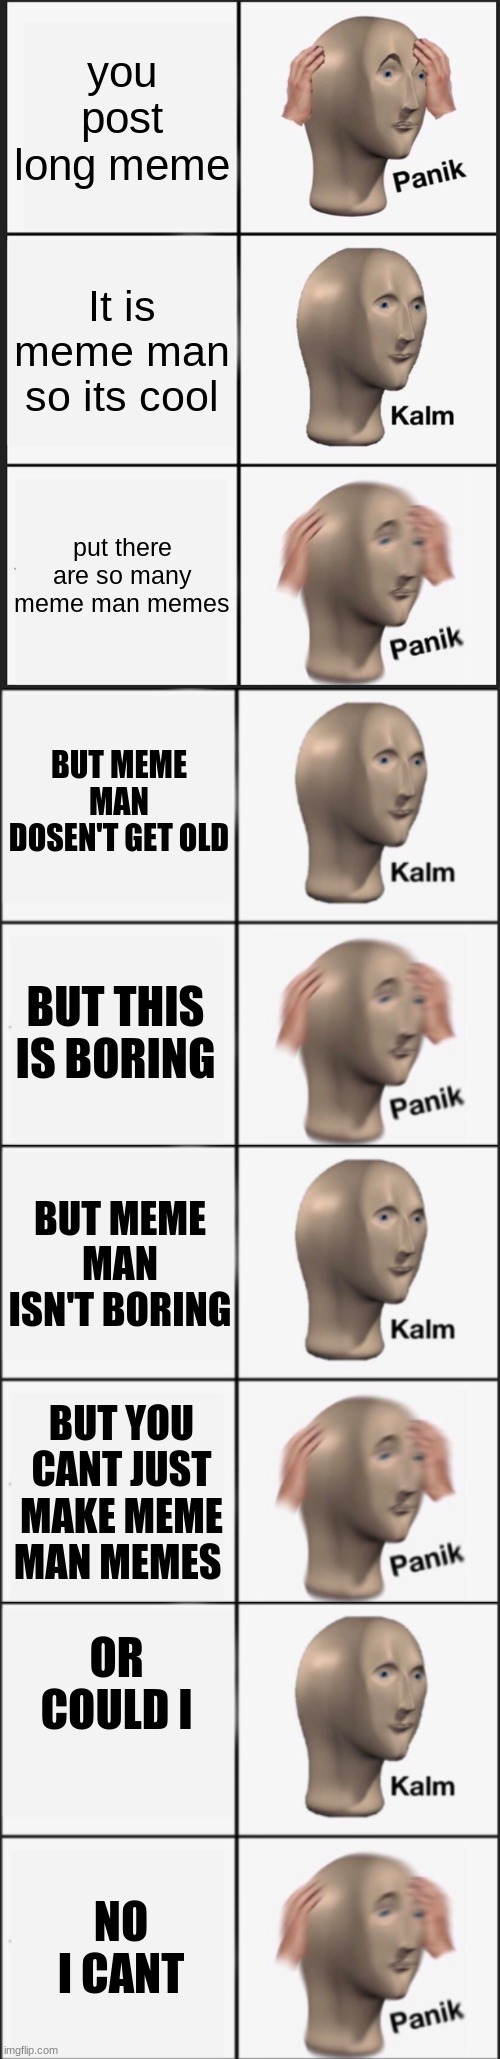 kalm panik kalm panik kalm panik kalm panik kalm panik |  you post long meme; It is meme man so its cool; put there are so many meme man memes; BUT MEME MAN DOSEN'T GET OLD; BUT THIS IS BORING; BUT MEME MAN ISN'T BORING; BUT YOU CANT JUST MAKE MEME MAN MEMES; OR COULD I; NO I CANT | image tagged in memes,panik kalm panik,kalm panik,meme man,long | made w/ Imgflip meme maker